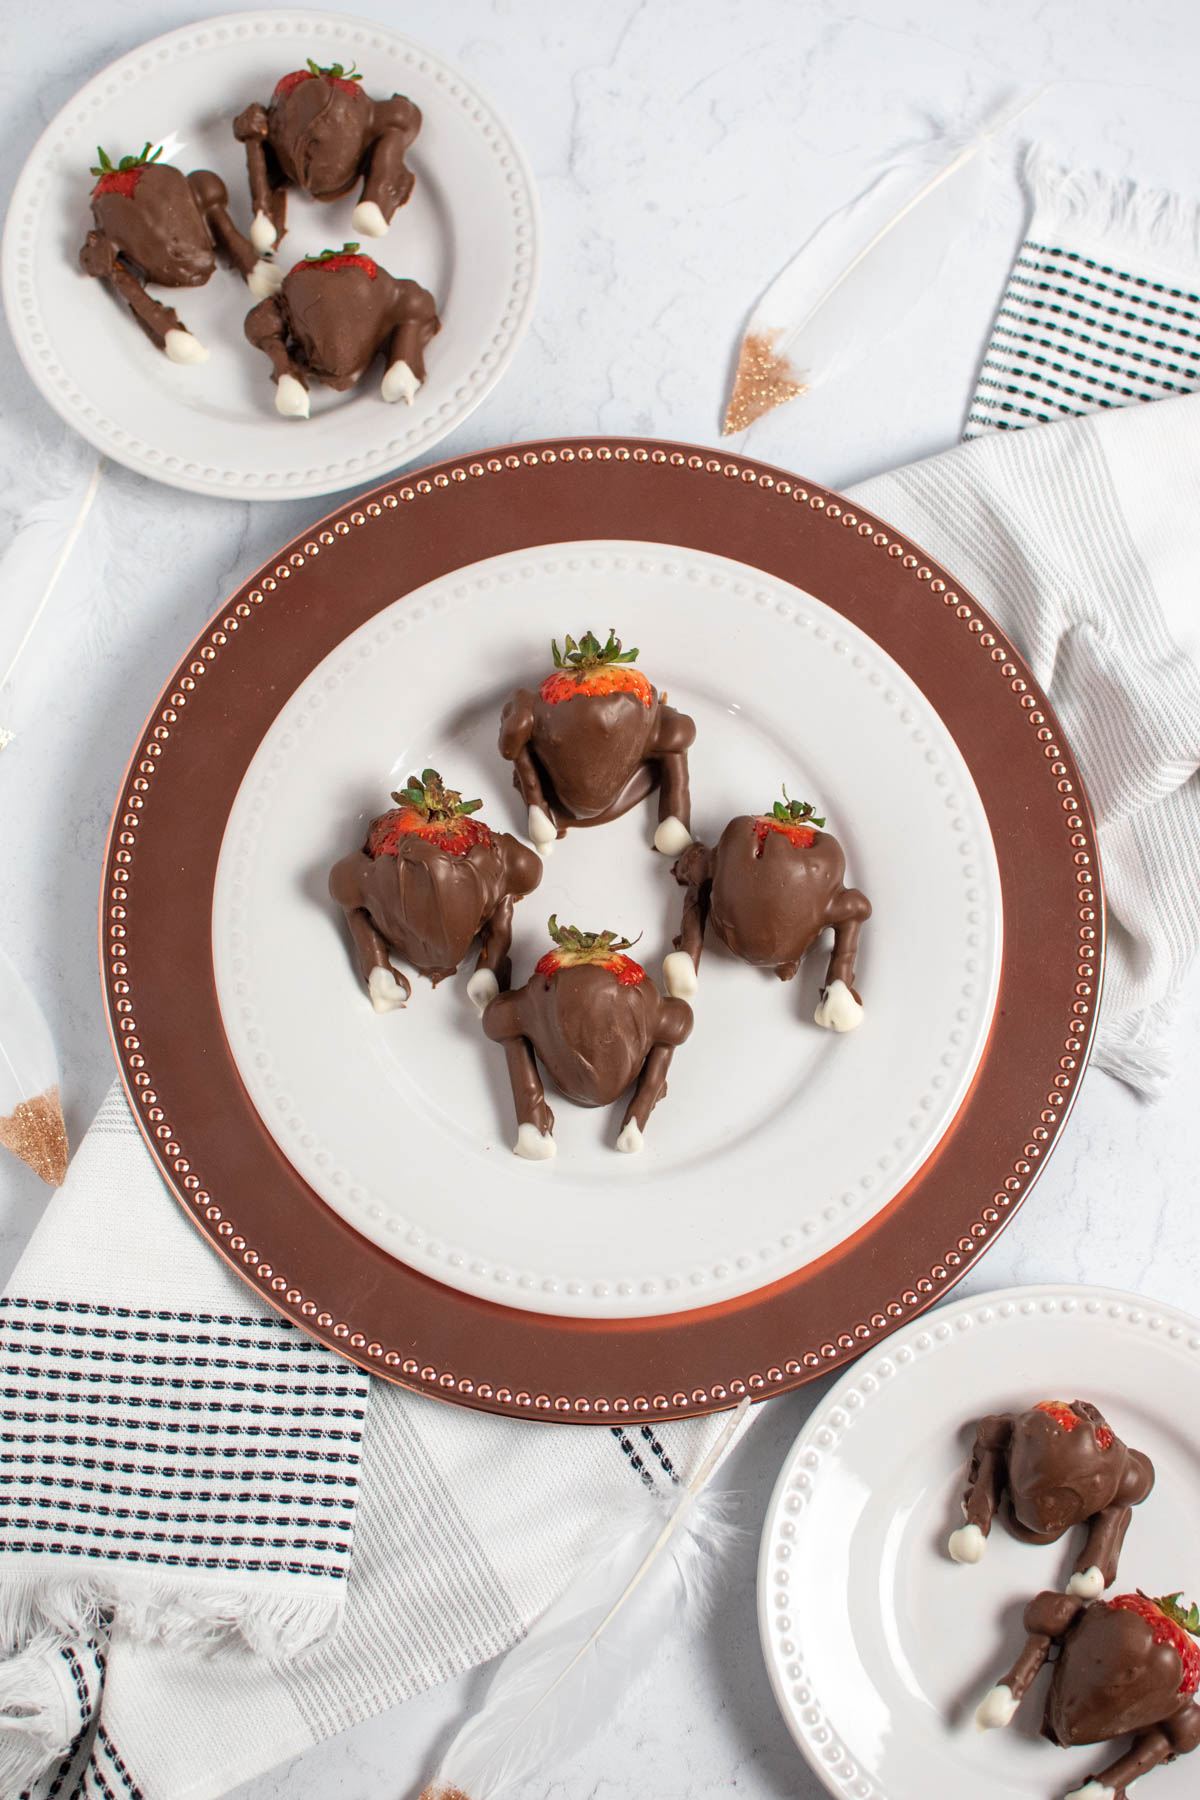 Chocolate dipped strawberry turkeys on white plates with feathers and kitchen towel all on table.